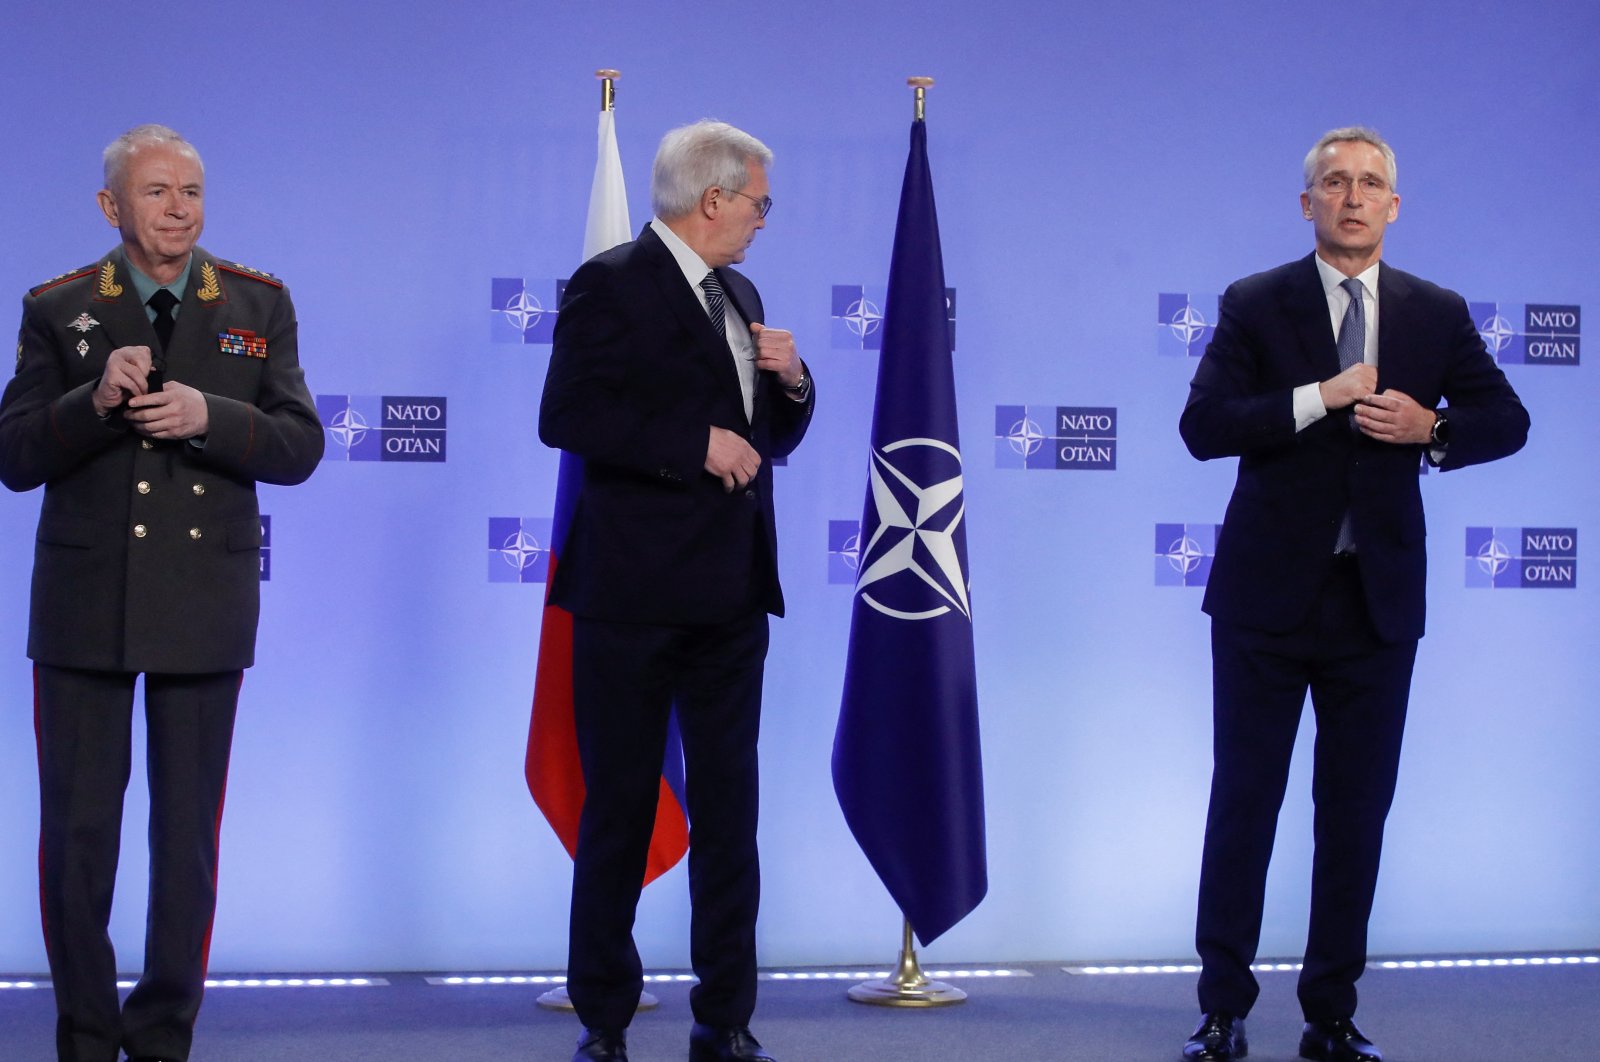 Russian Deputy Defense Minister Colonel General Alexander Fomin, Russian Deputy Foreign Minister Alexander Grushko and NATO Secretary-General Jens Stoltenberg are seen during NATO-Russia Council at the Alliance&#039;s headquarters in Brussels, Belgium, Jan. 12, 2022. (REUTERS Photo)